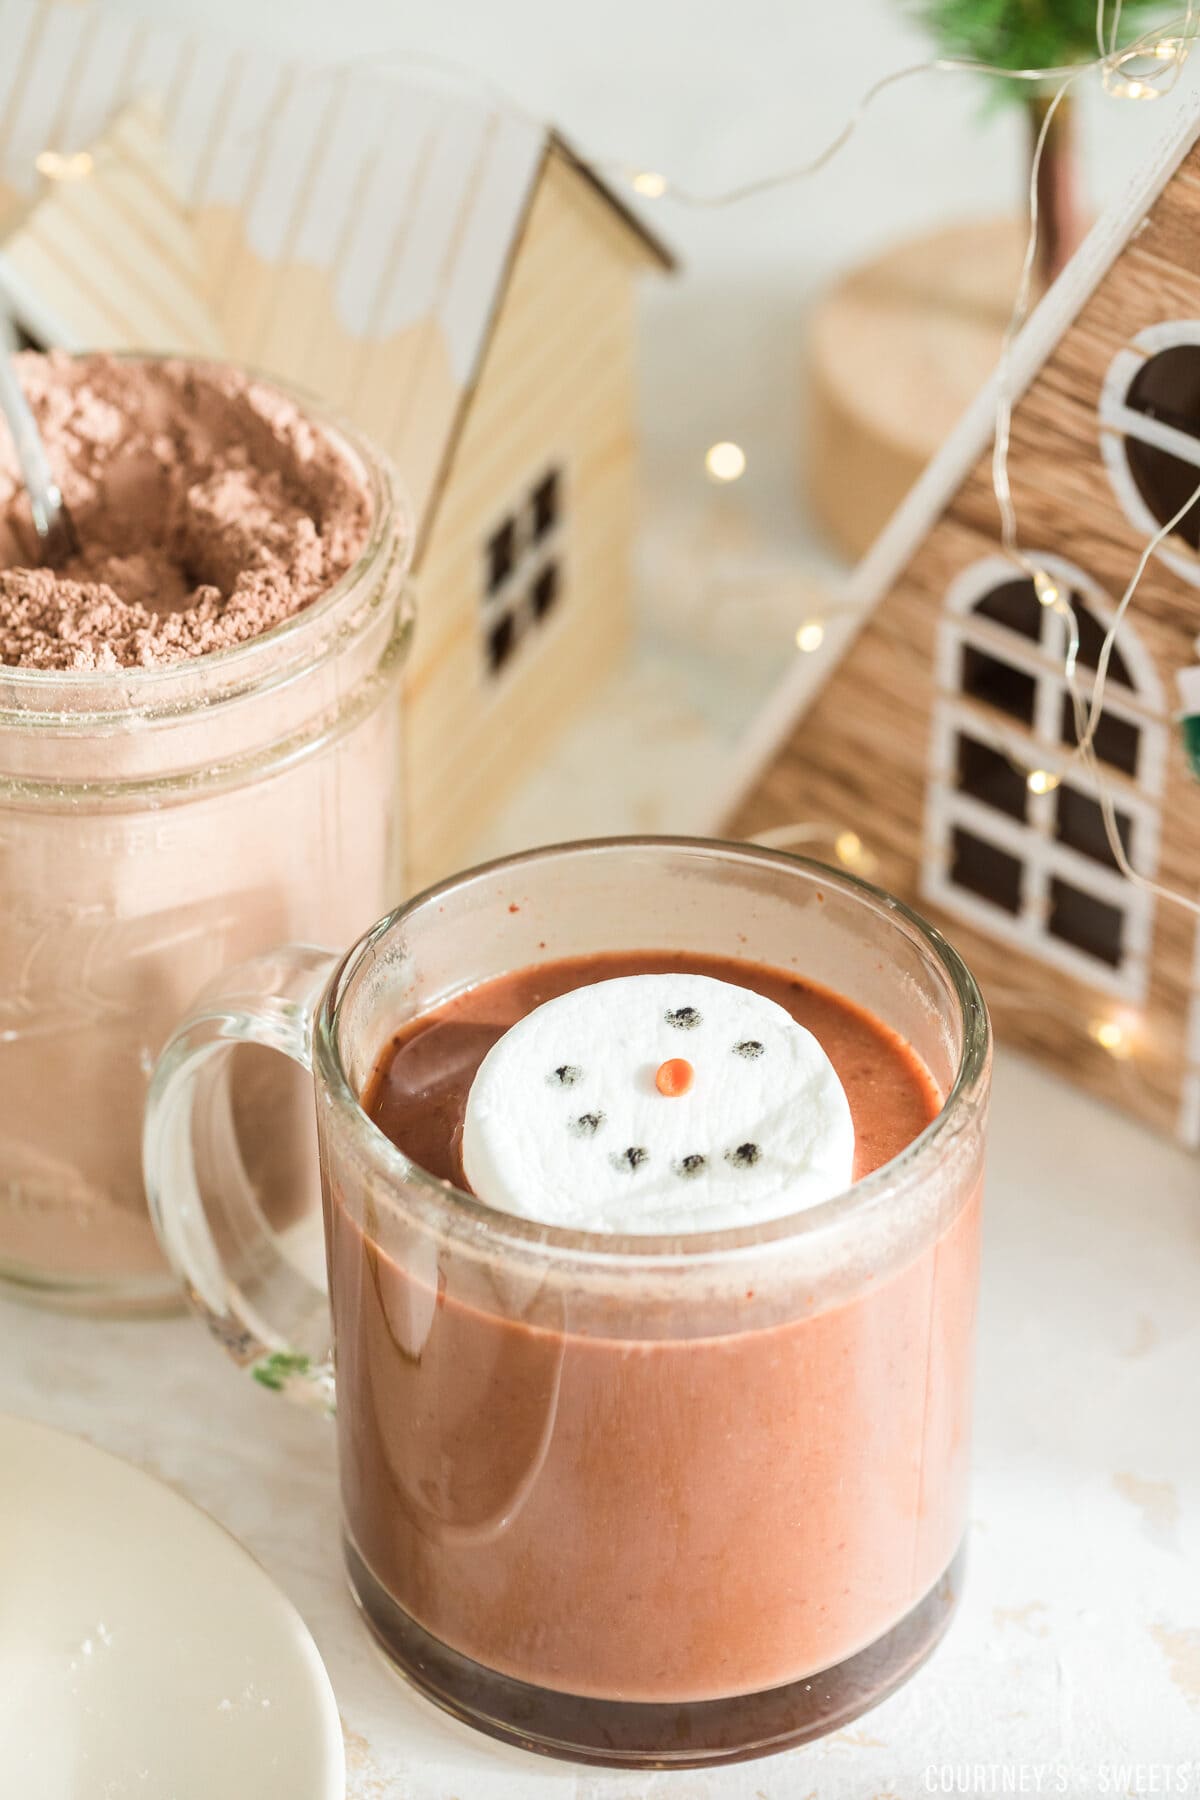 snowman marshmallow in a glass of hot chocolate with cocoa